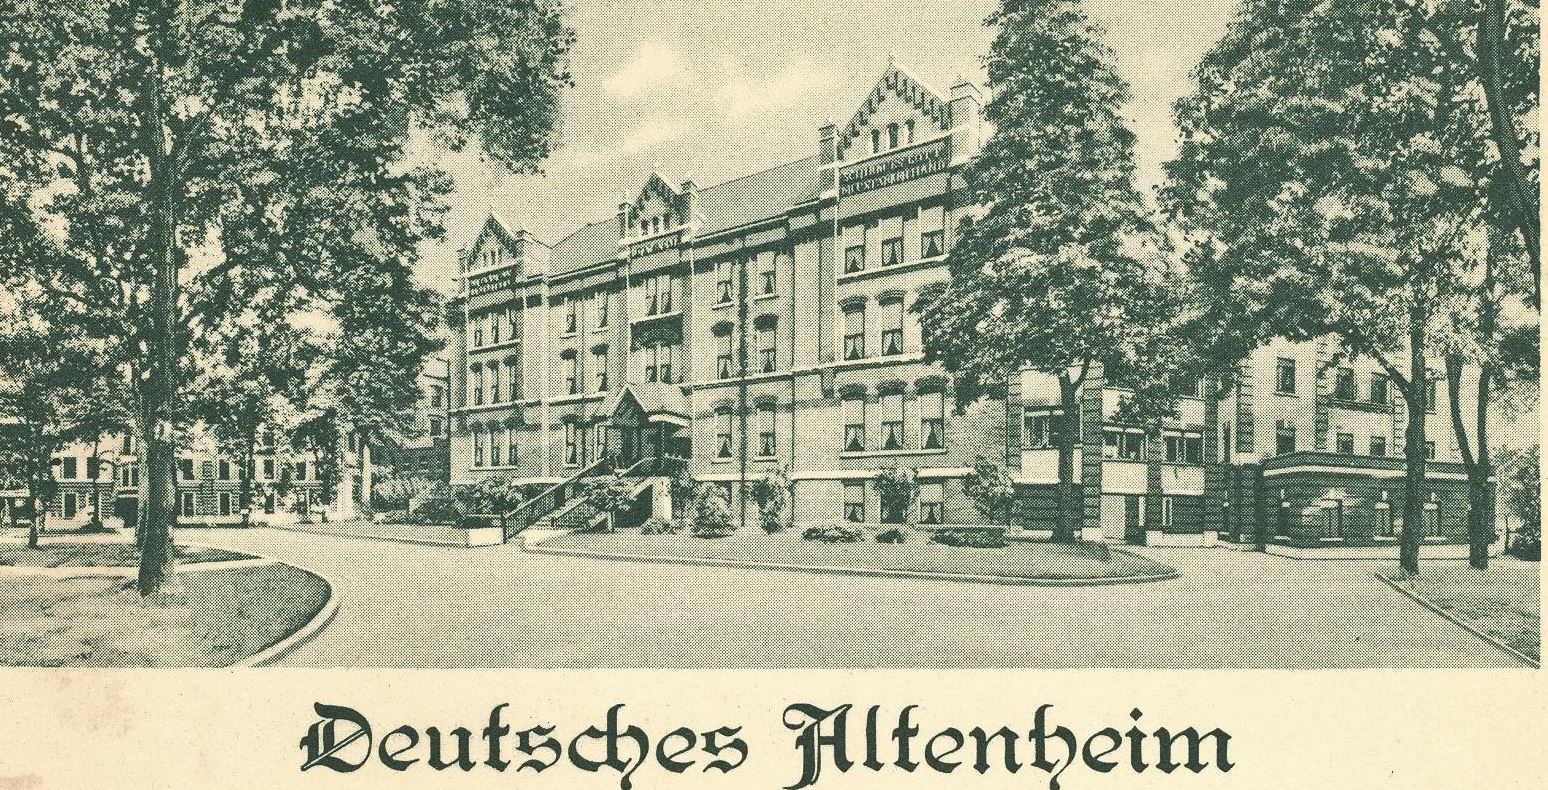 The Altenheim: A German “Old People’s Home” Through the Ages